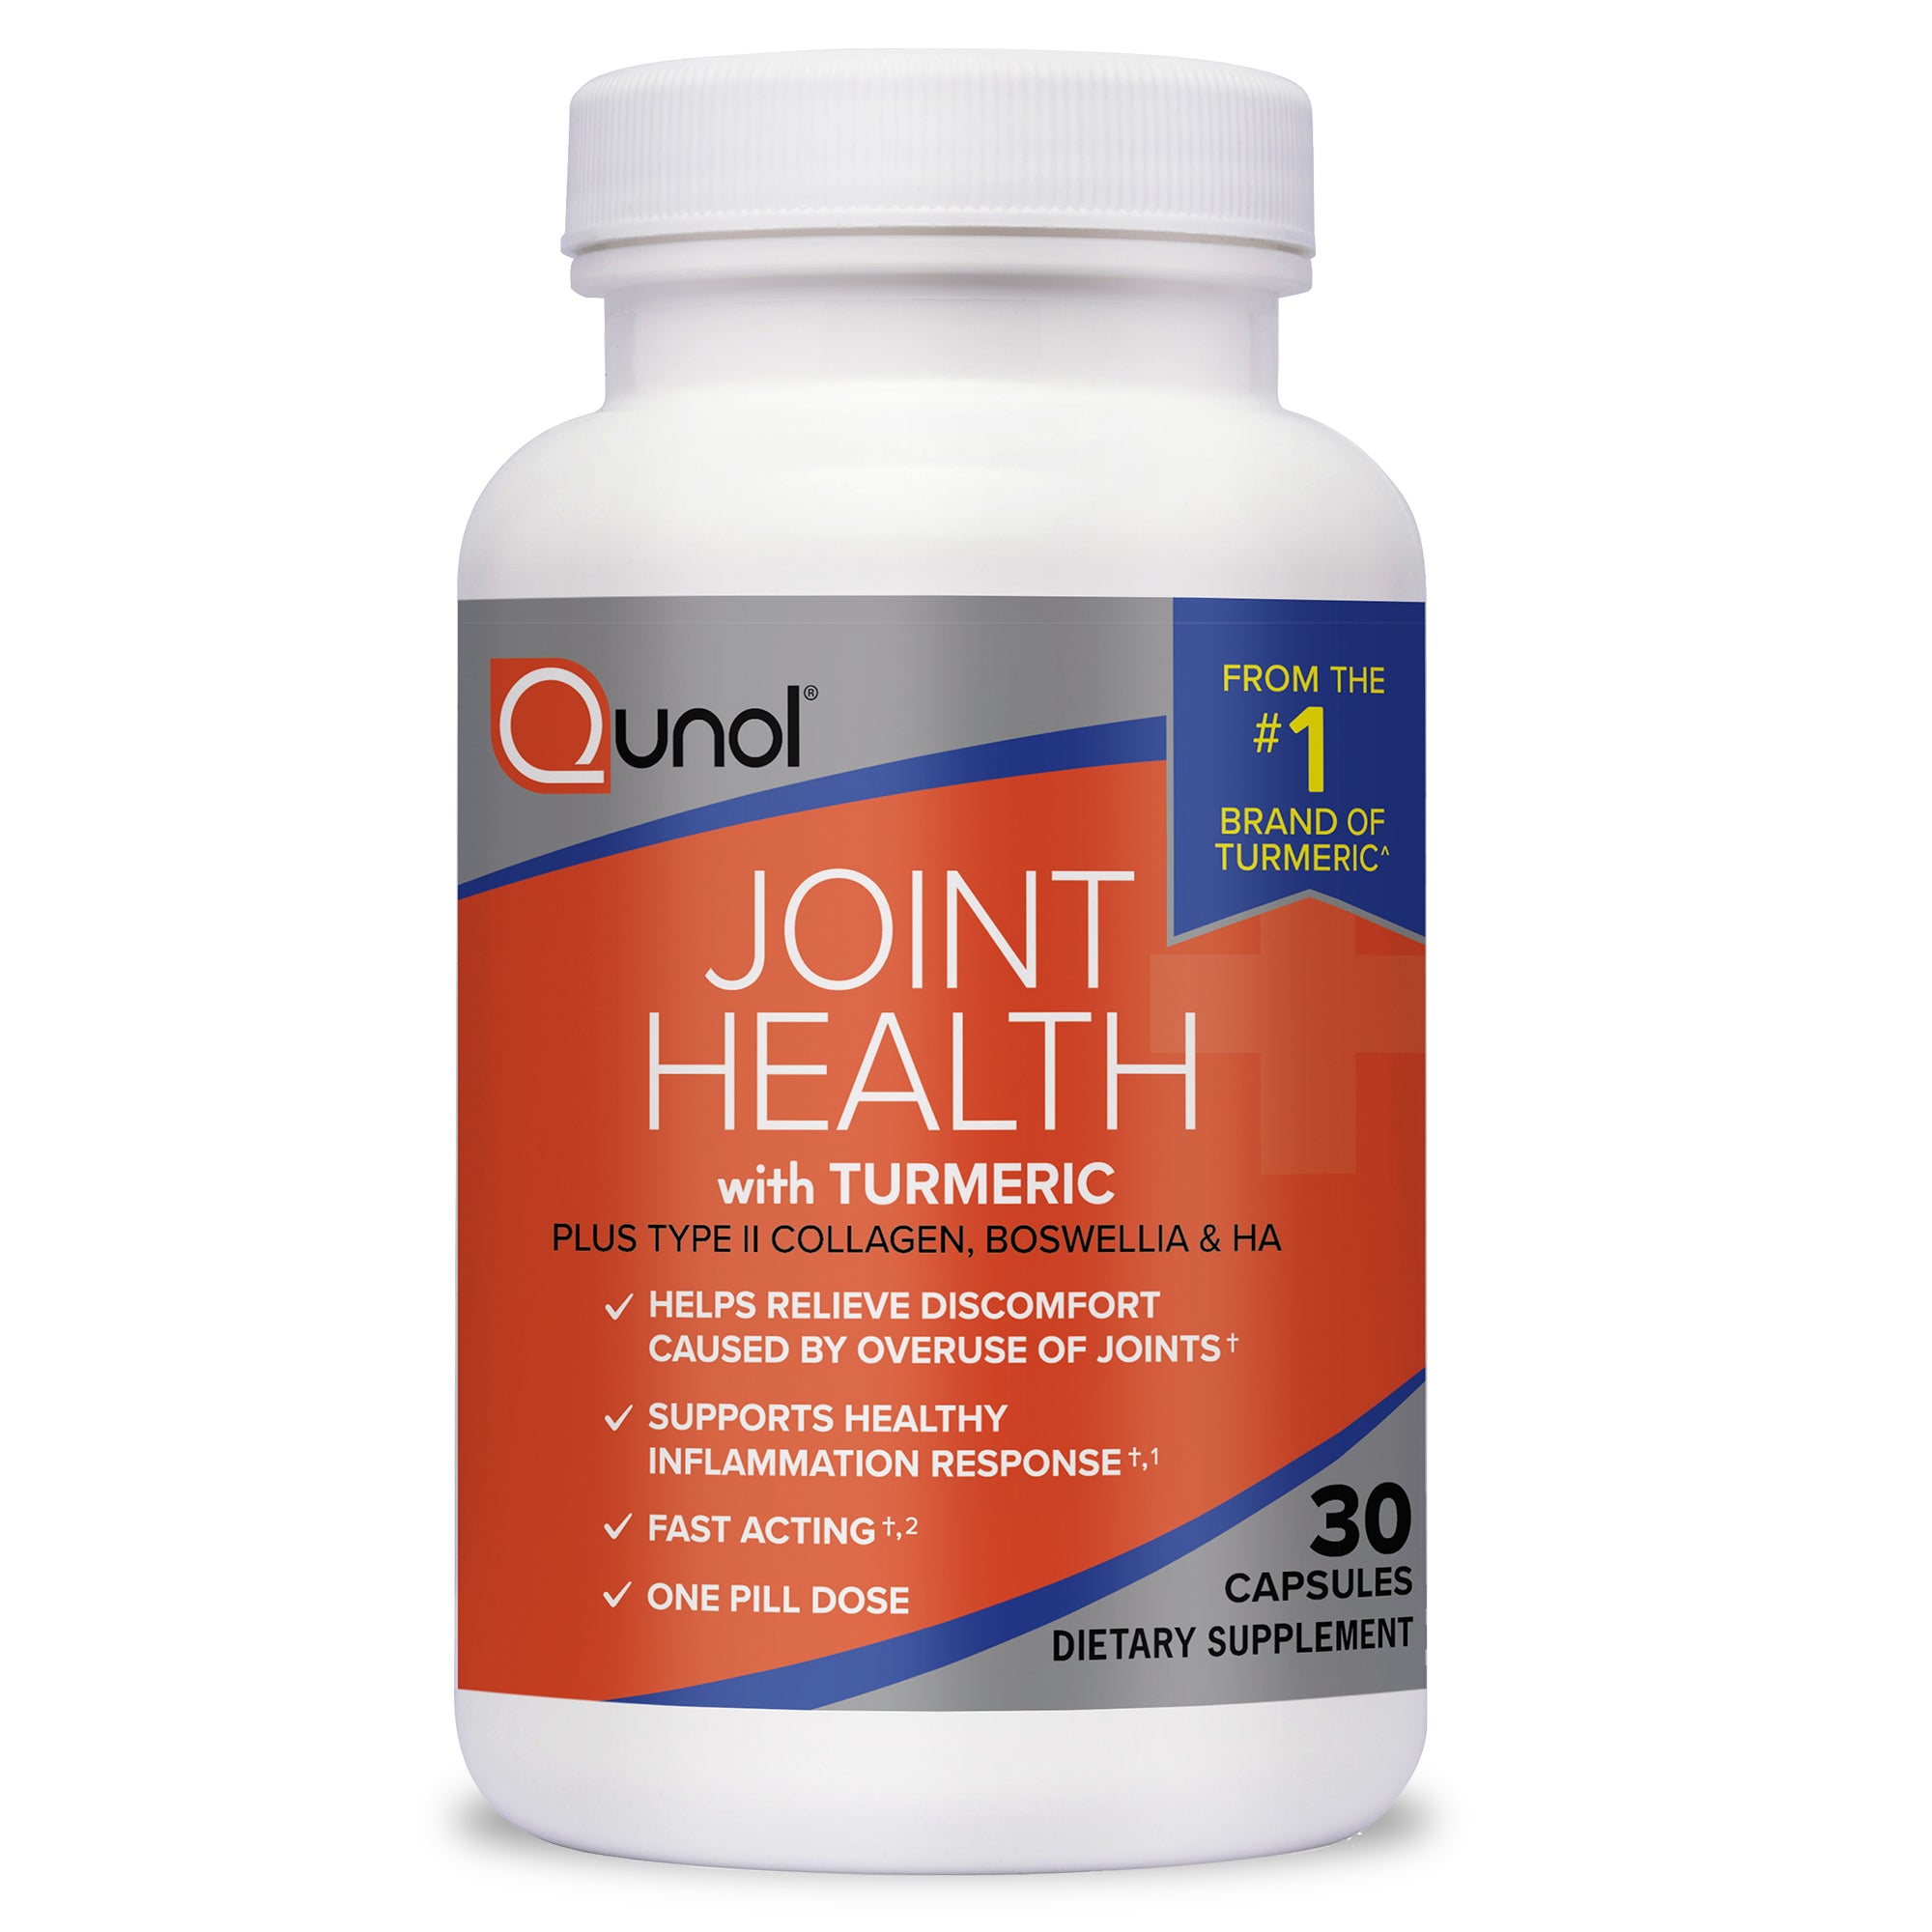 Qunol 5-in-1 Joint Support Supplement, Fast Acting, One Pill Dose, Support Healthy Inflammation Response & Discomfort Caused by Overuse of Joints, Alternative to Glucosamine Chondroitin MSM, 30 Count